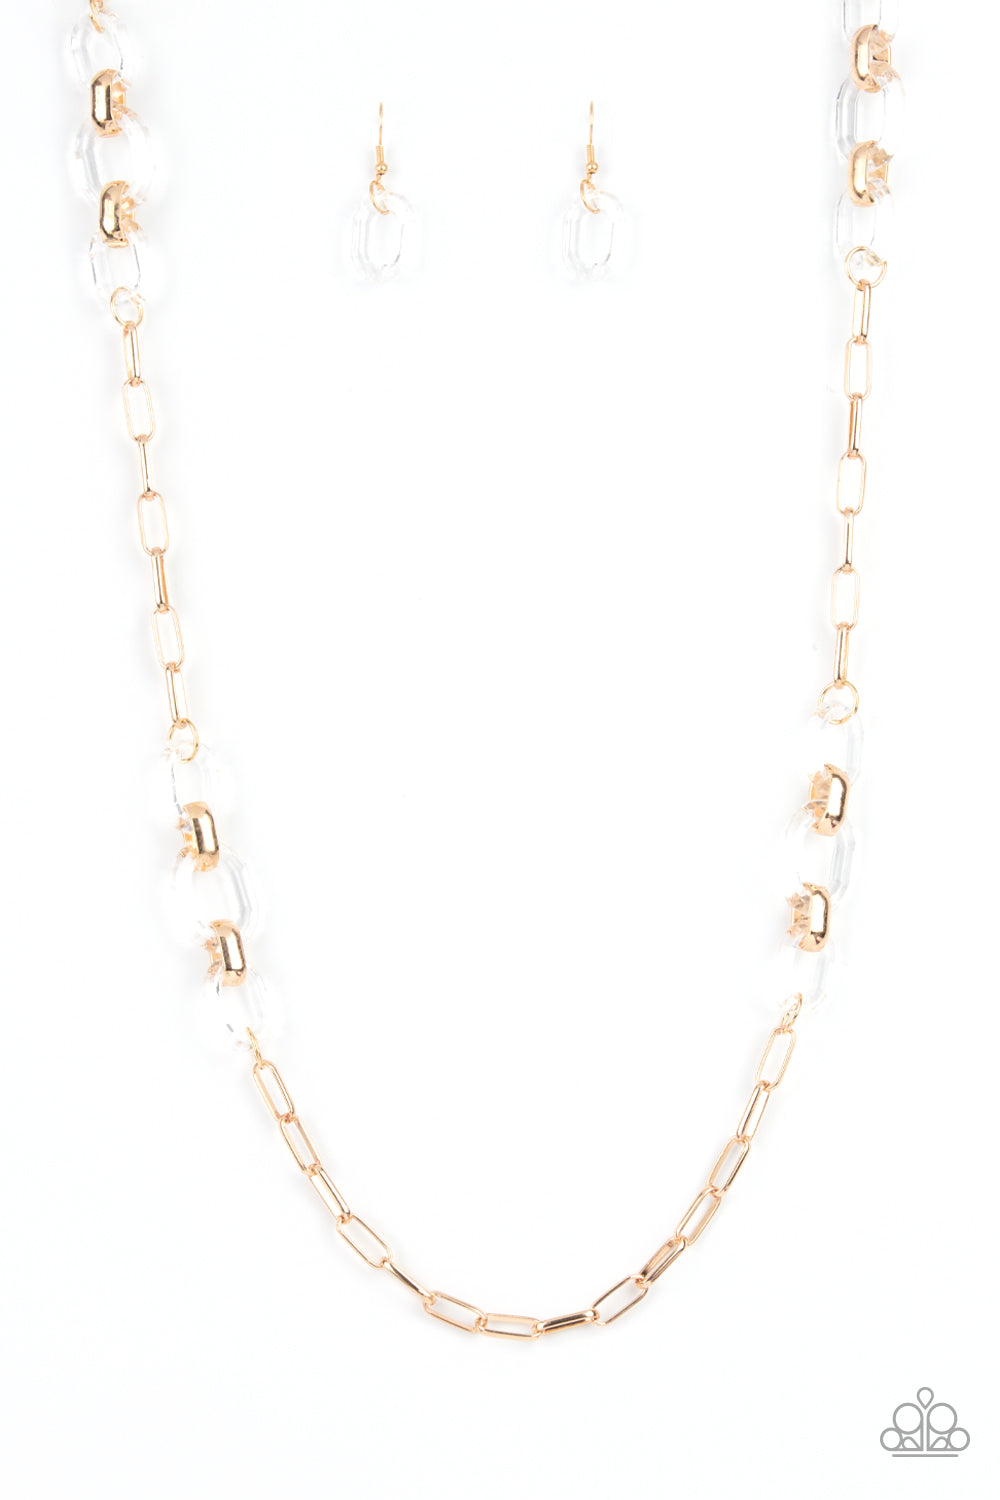 Have I Made Myself Clear? - Gold & White Necklace Set - Princess Glam Shop